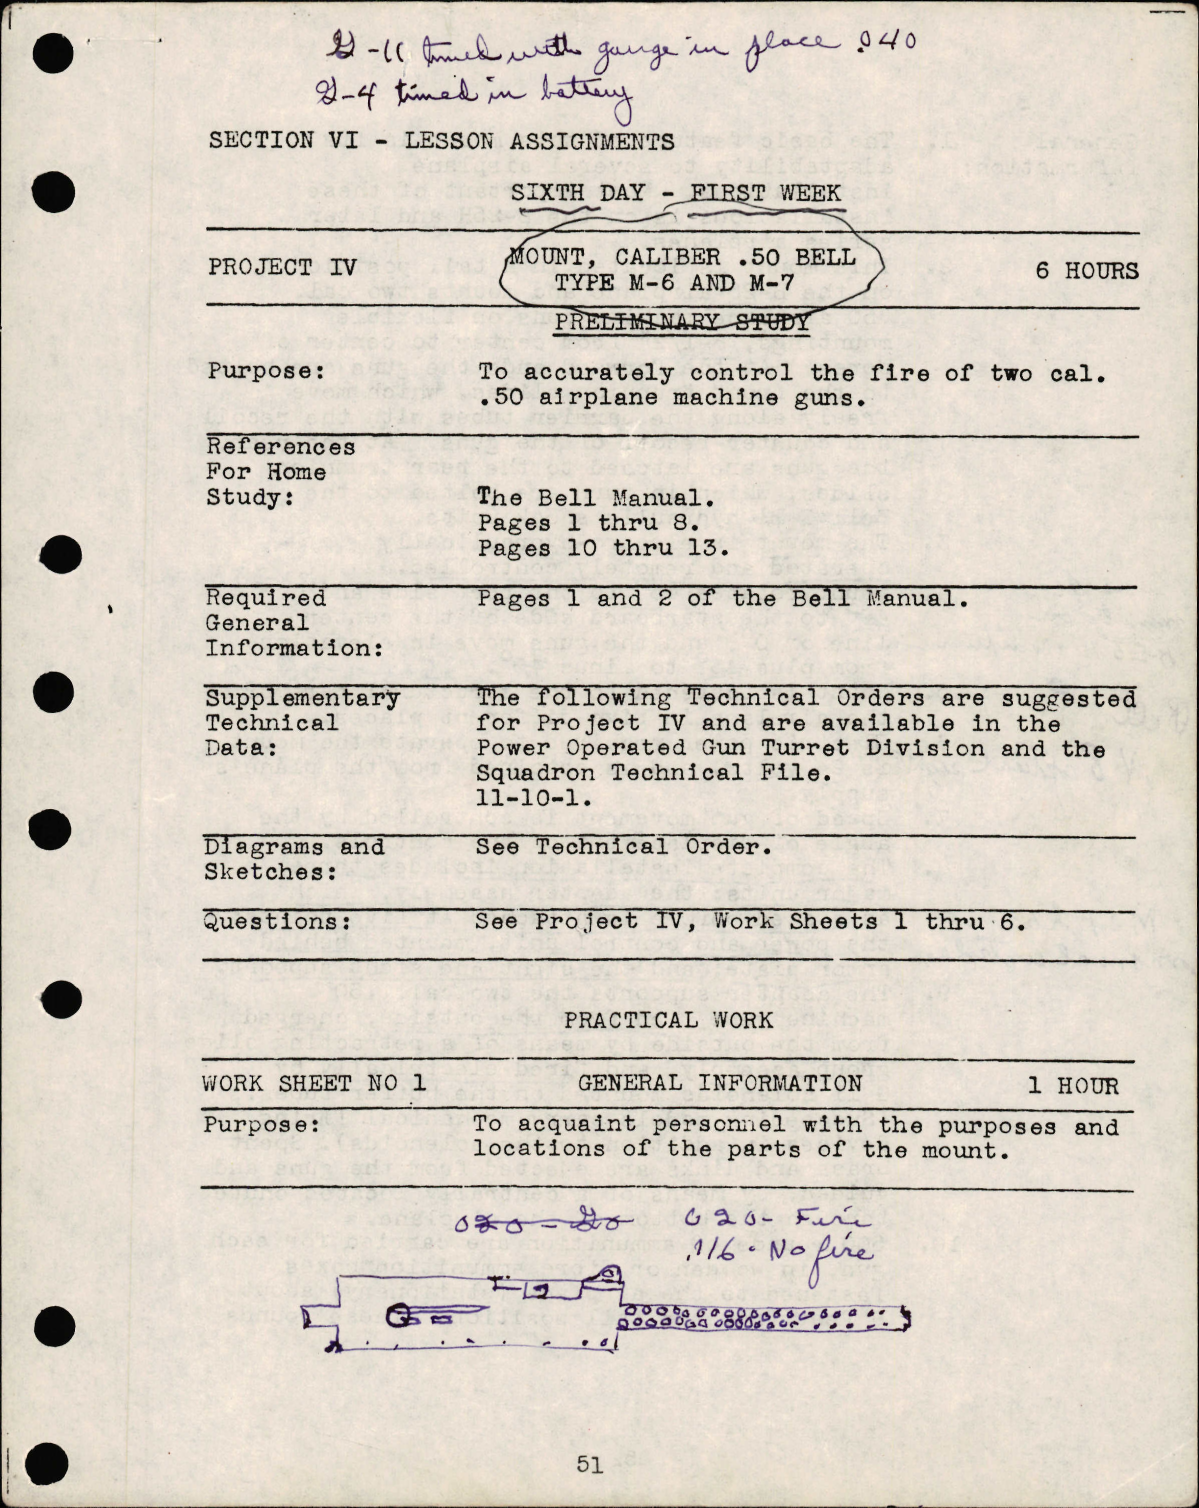 Sample page 1 from AirCorps Library document: Lesson Assignments for Mount, Caliber .50 Bell Type M-6 and M-7